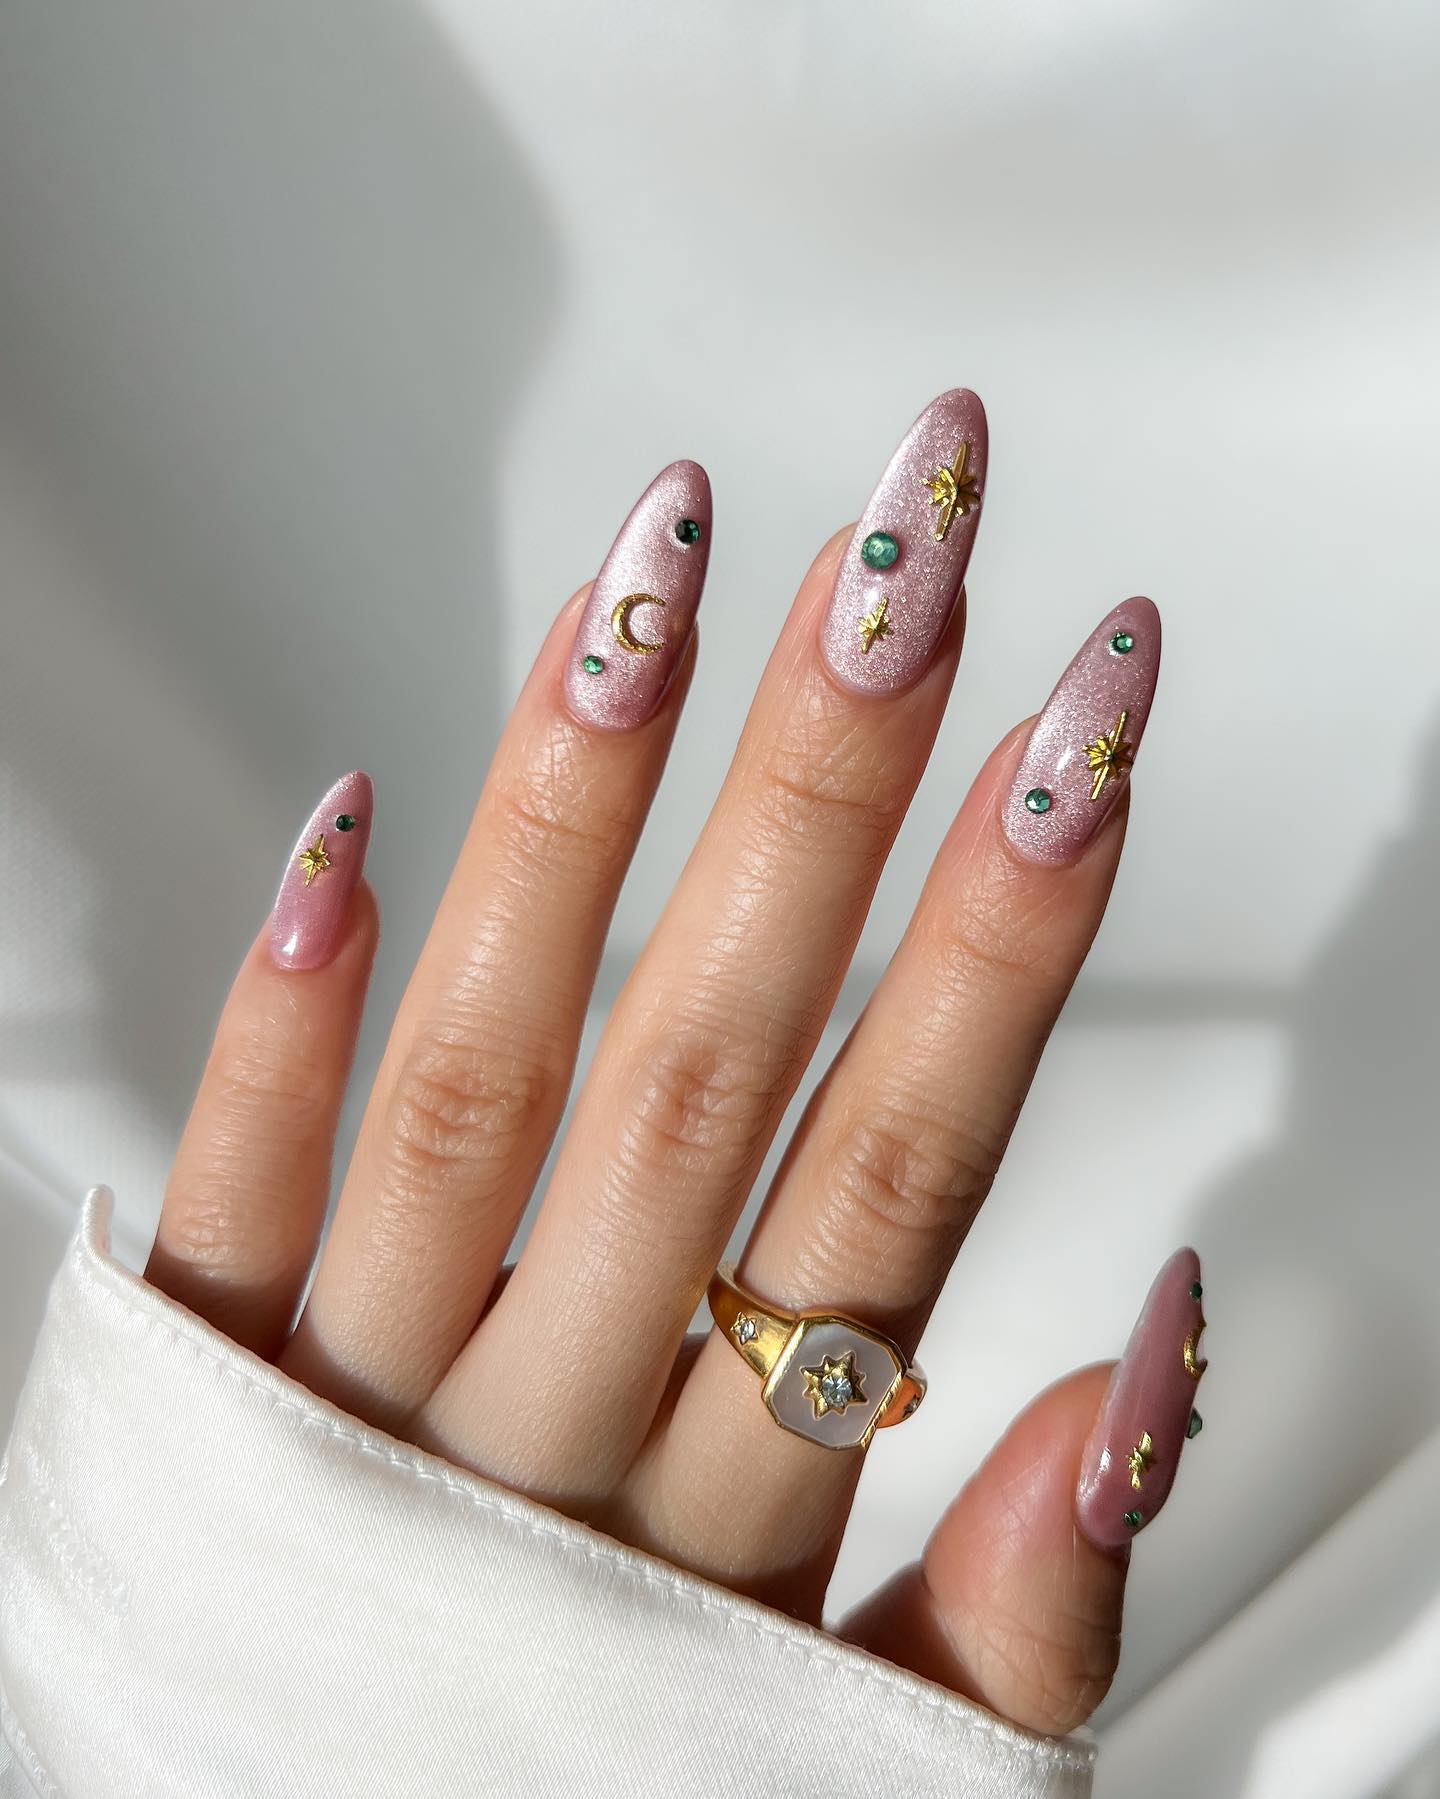 100 Pretty Spring Nail Designs To Try This Year images 93